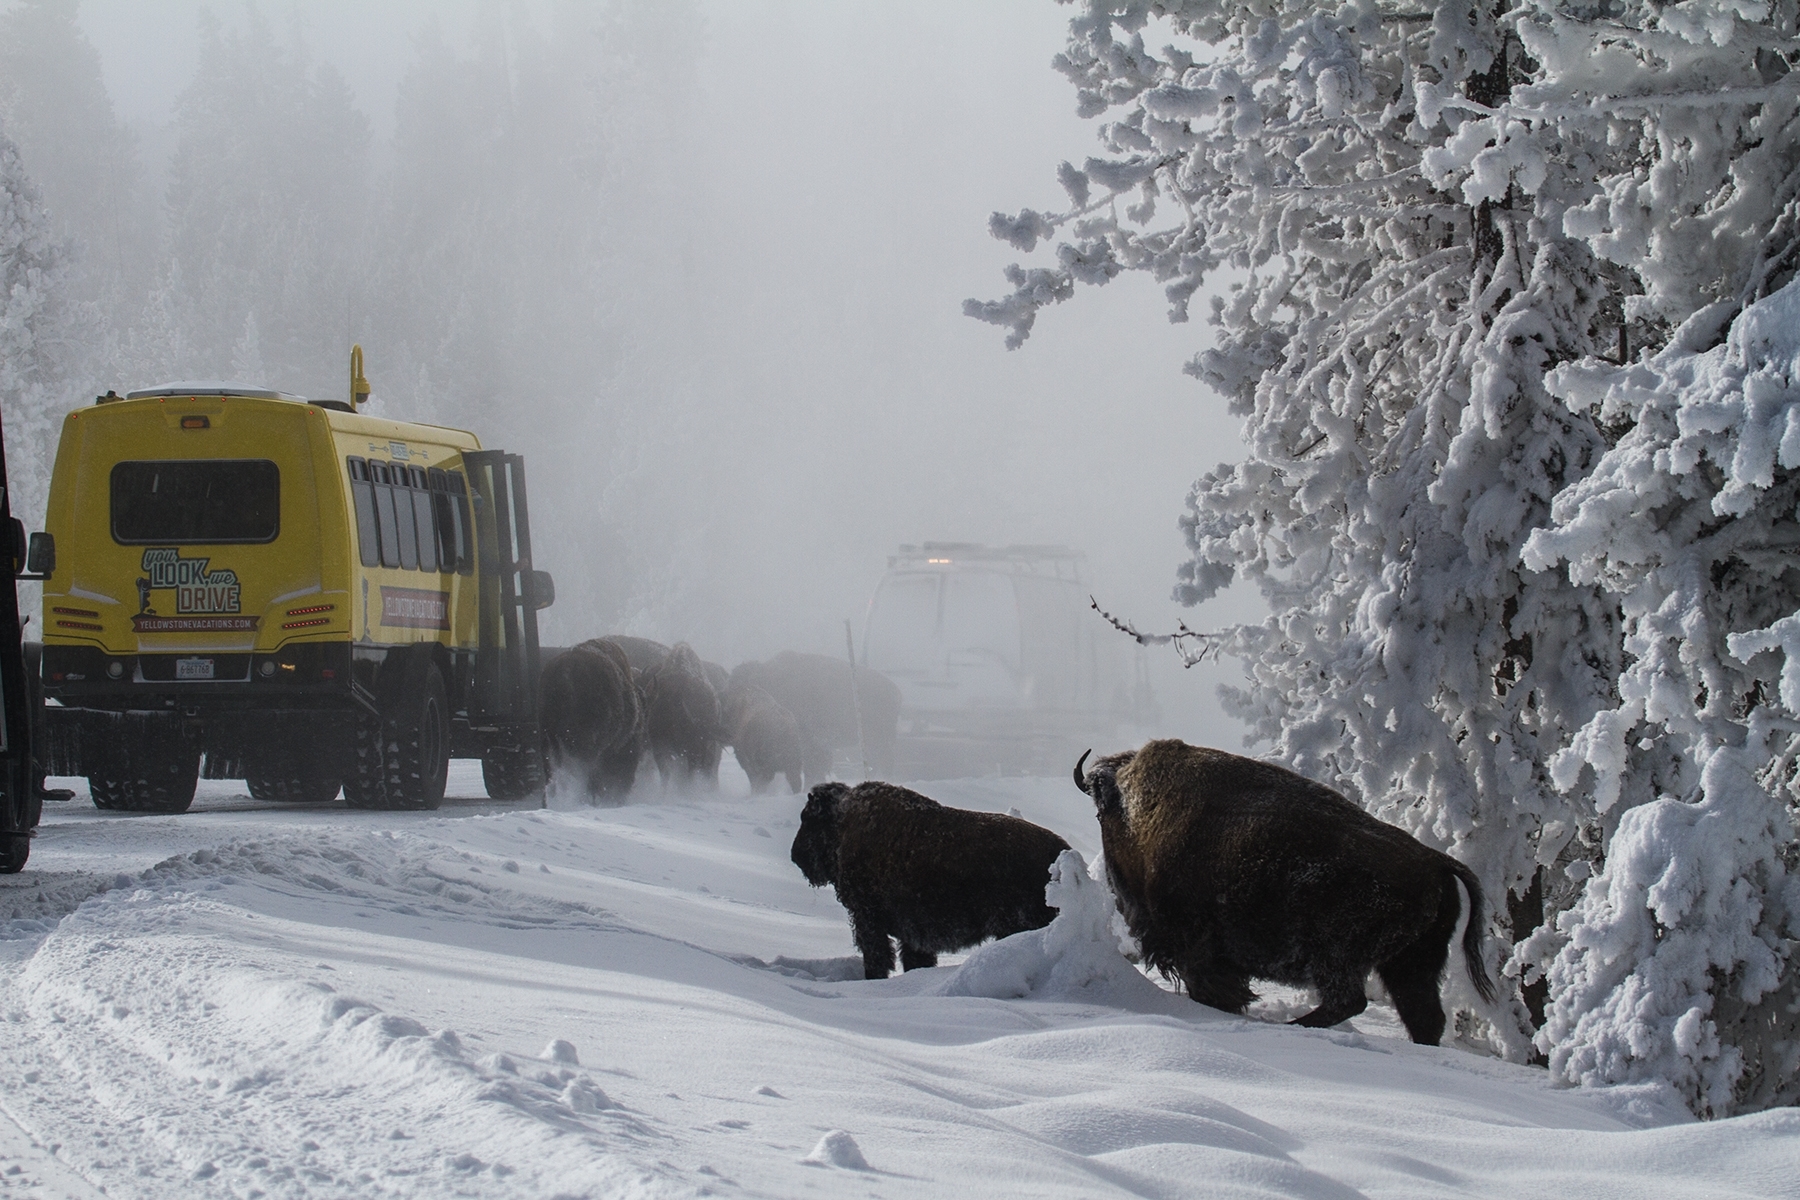 Bison-Moving-On-The-Plowed-Roadway-In-Yellowstone-National-Park-In-Winter-Causes-Traffic-Congestion.-JA-Best-in-Show.-by-Lucy-Kiang-LV